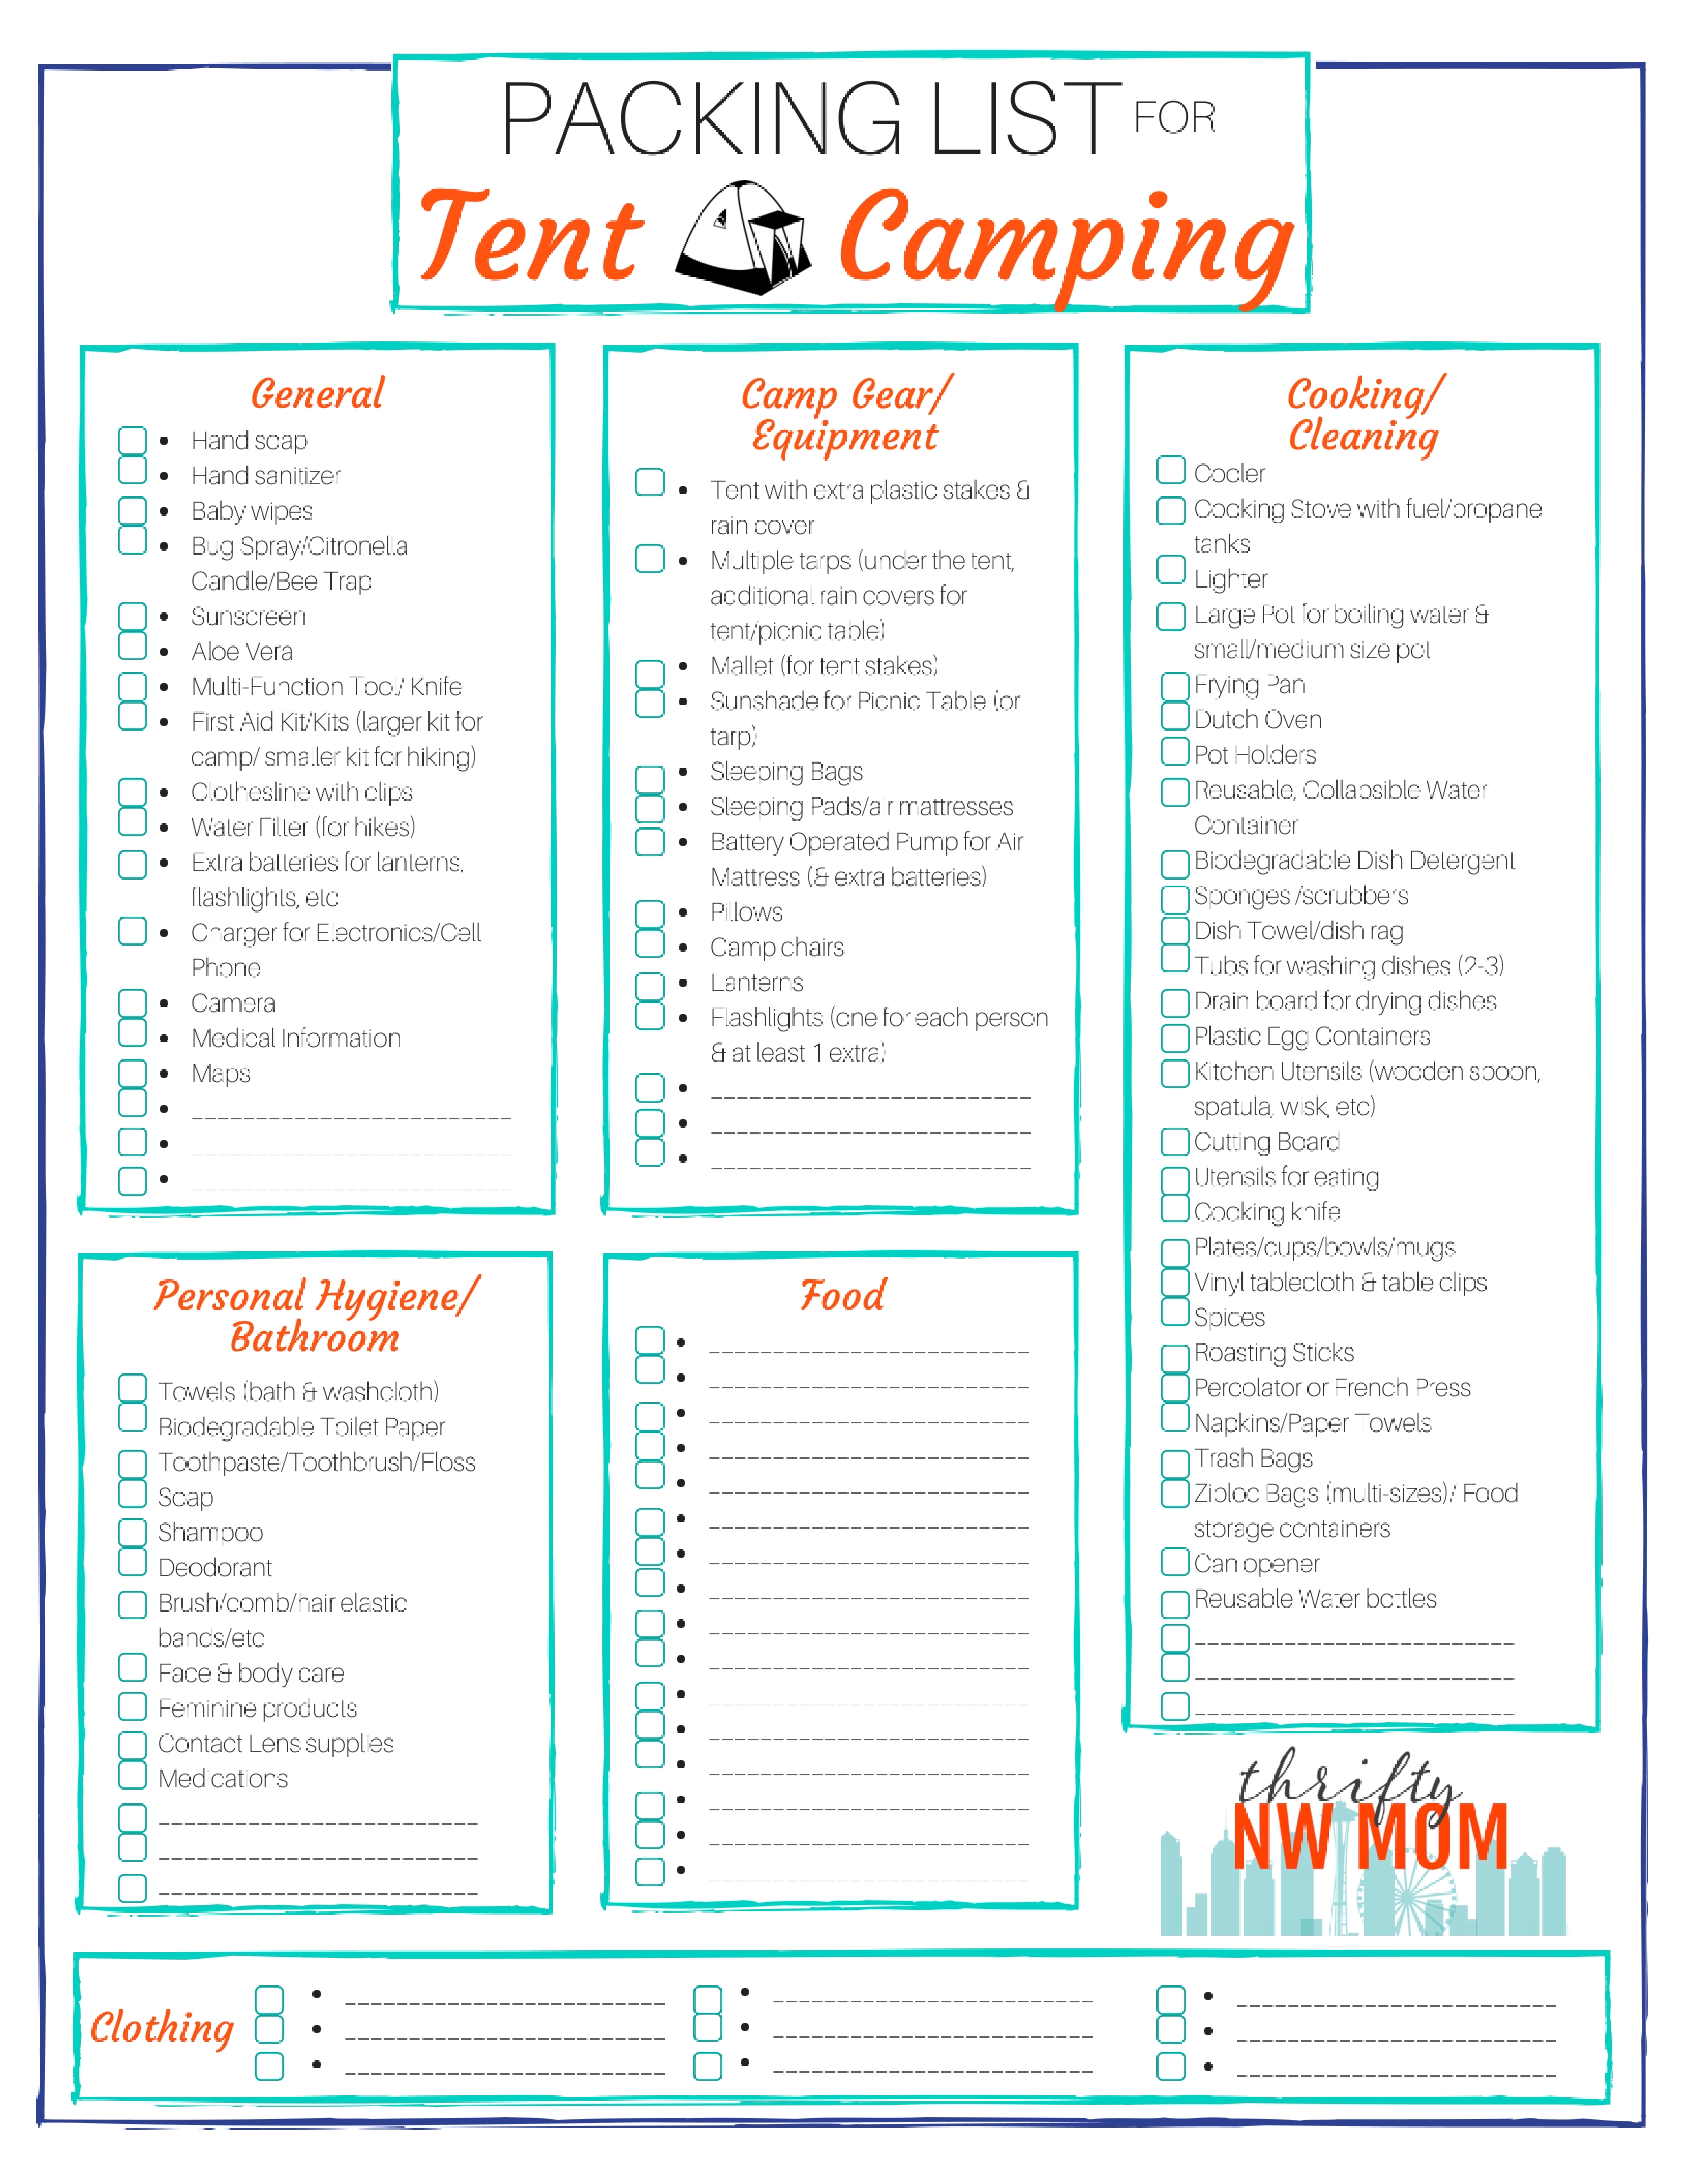 Packing List for Tent Camping   Free Printable   Thrifty NW Mom